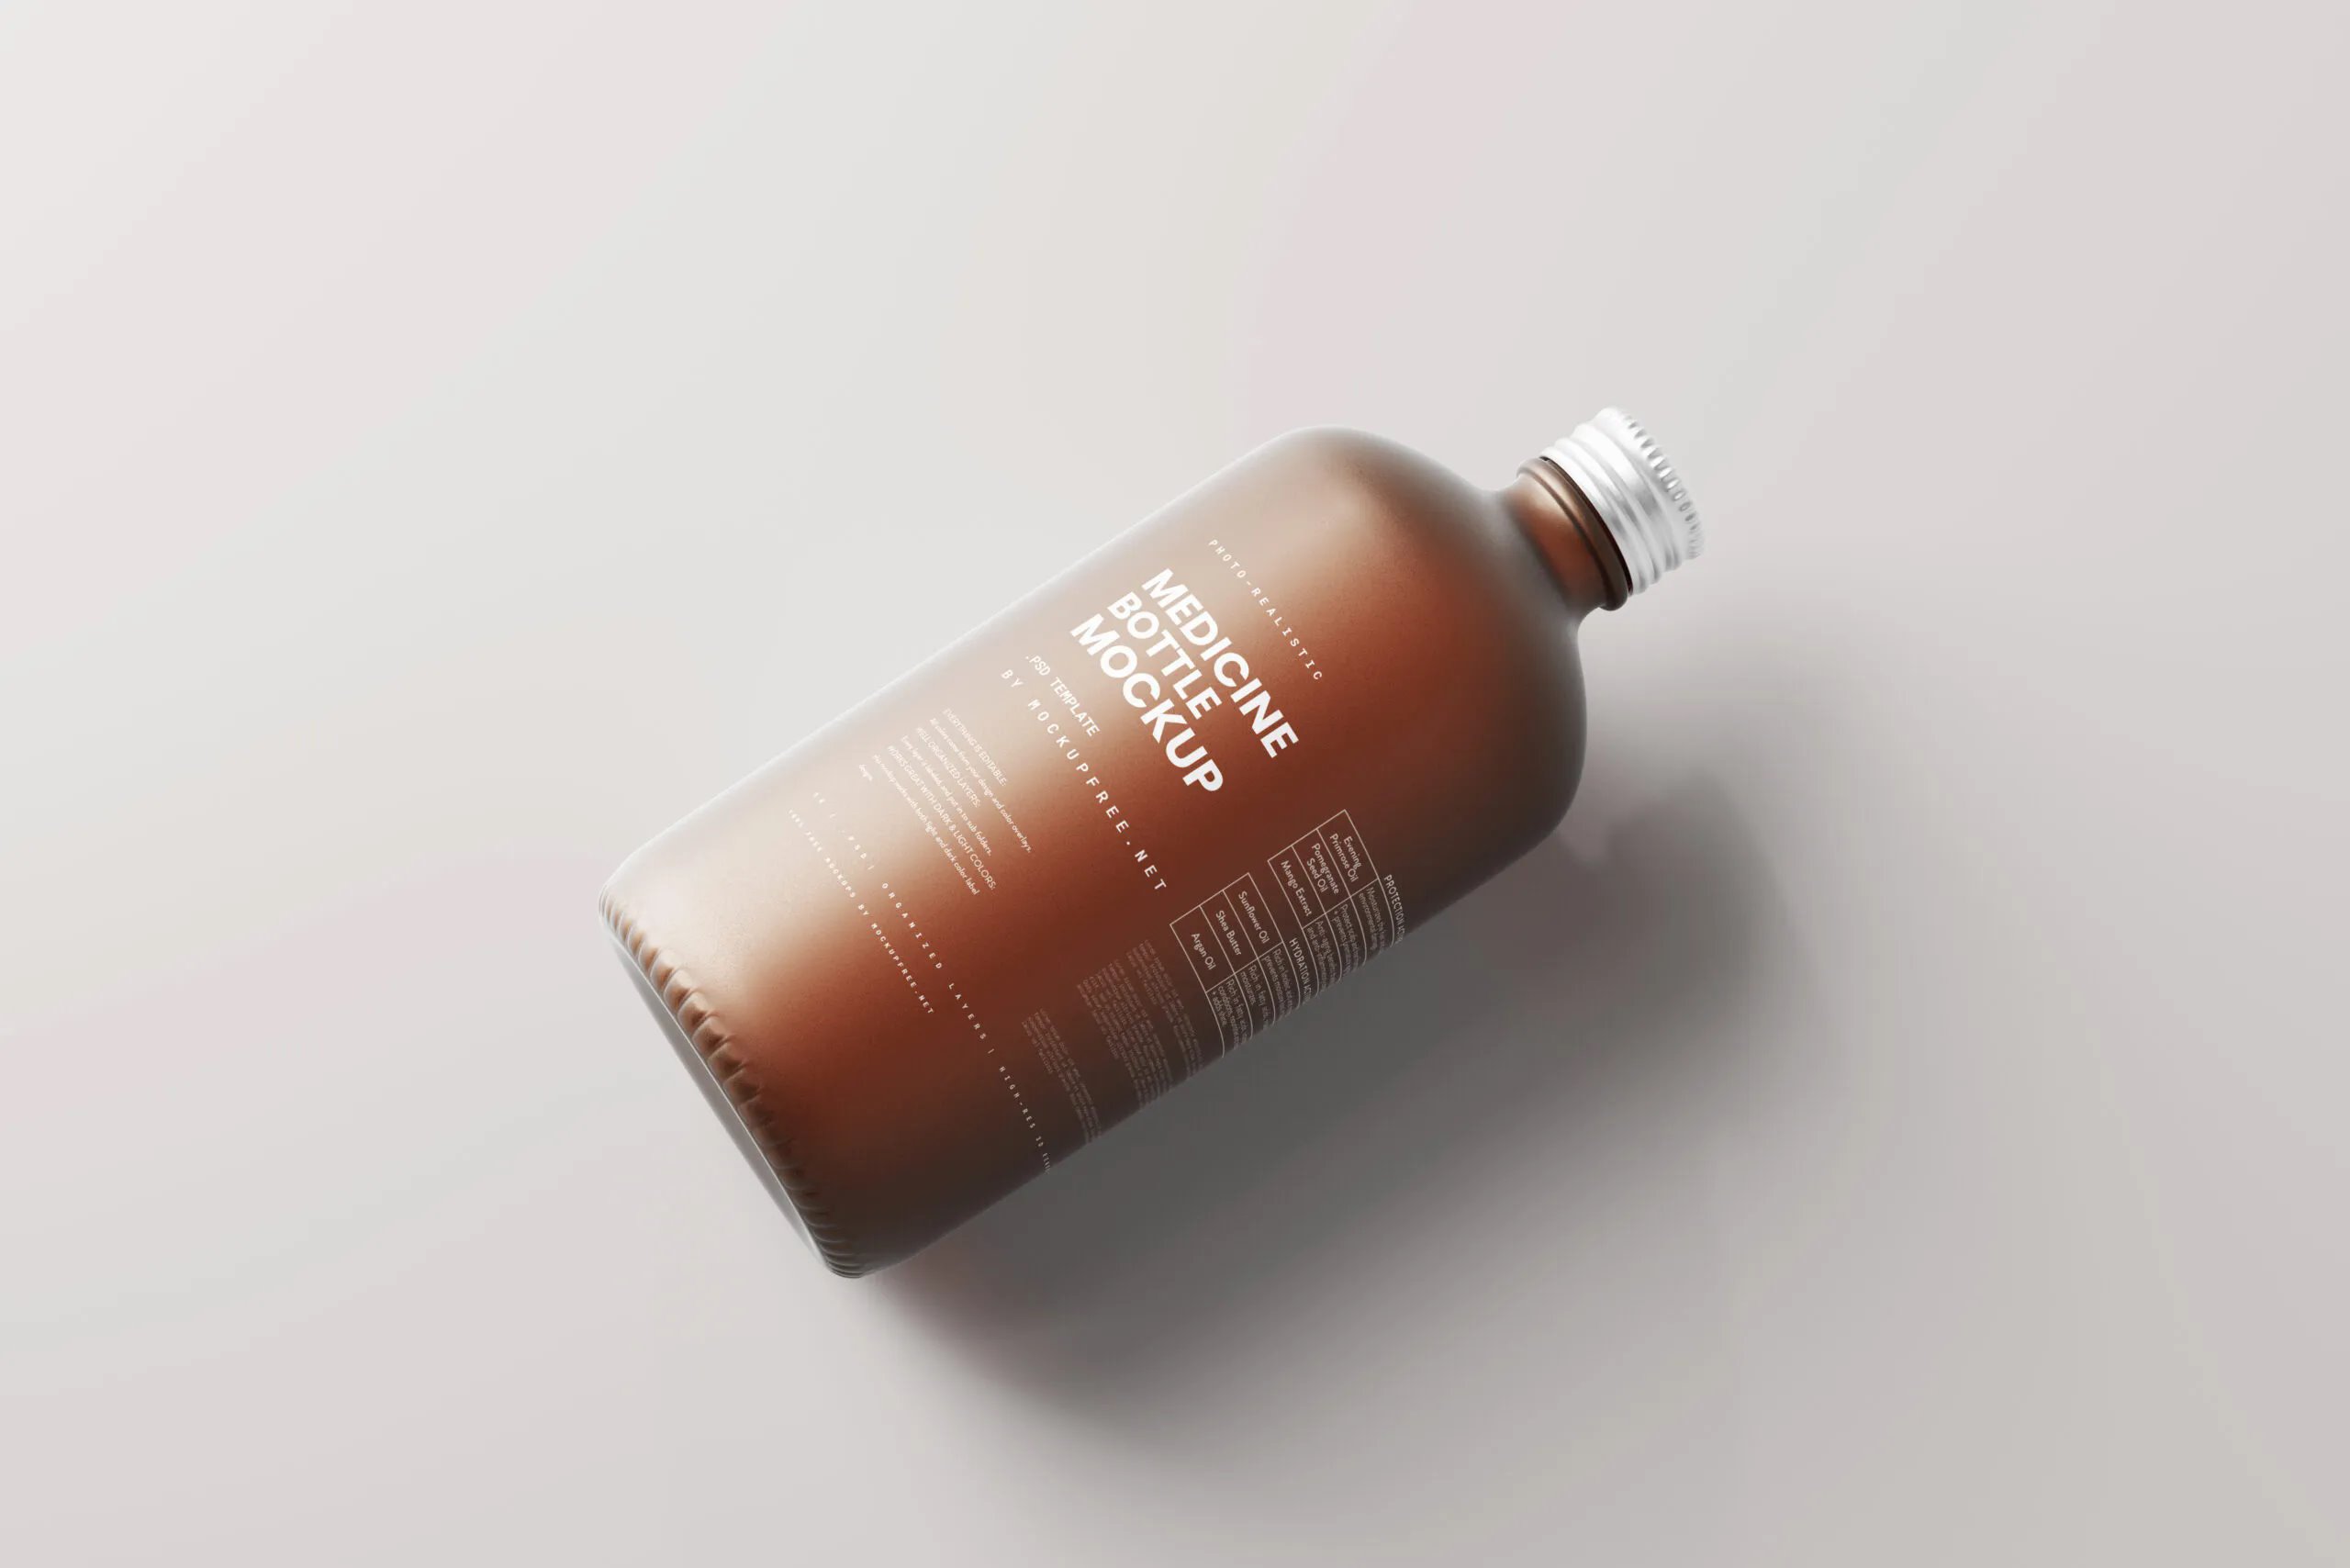 Frosted Glass Pills Bottle Mockup - Free Download Images High